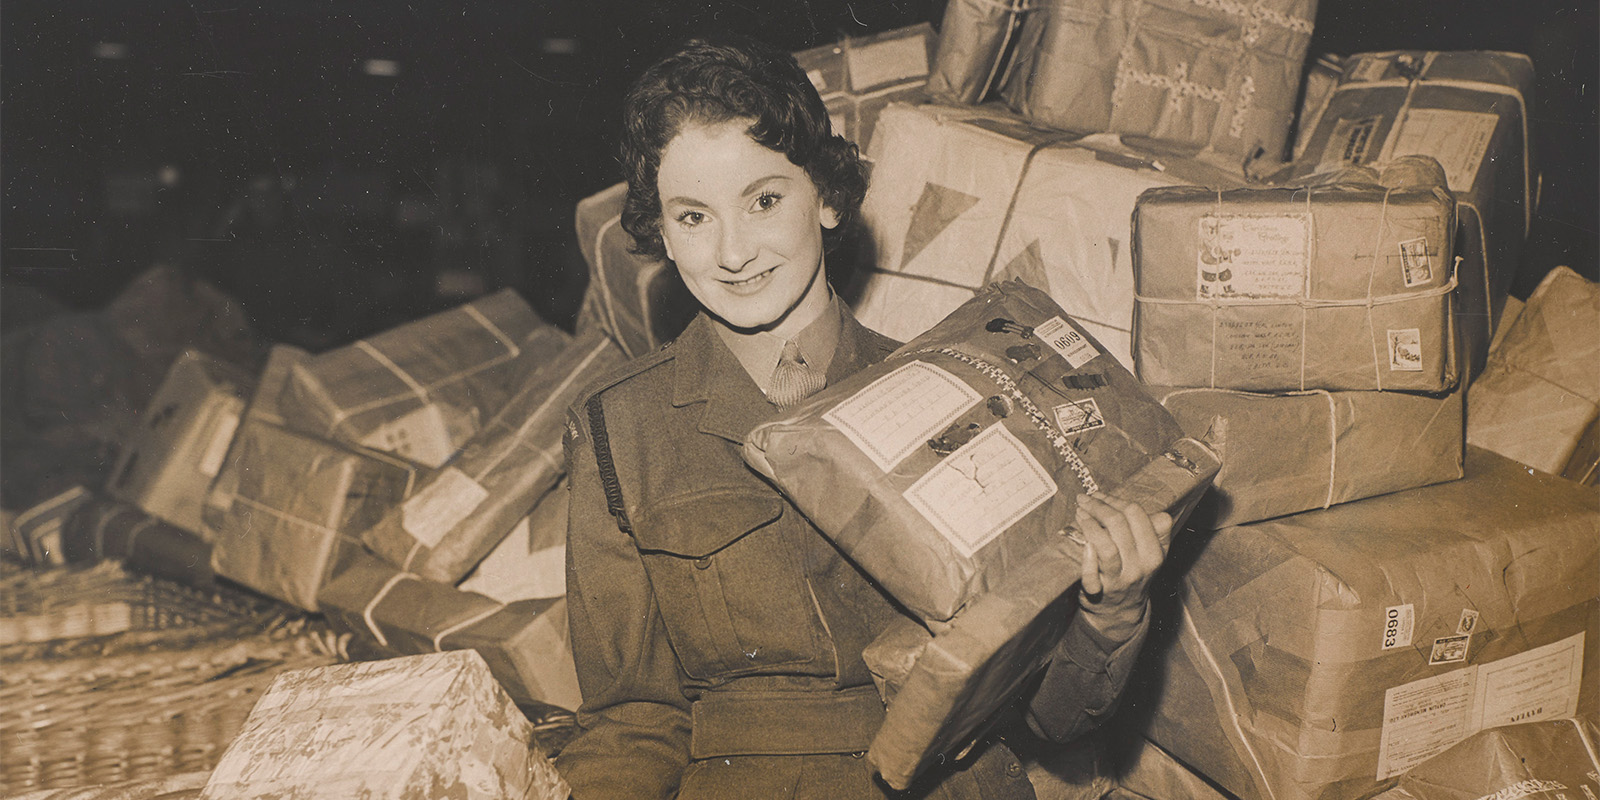 A member of the Women's Royal Army Corps carrying out postal work at Christmas time, c1950